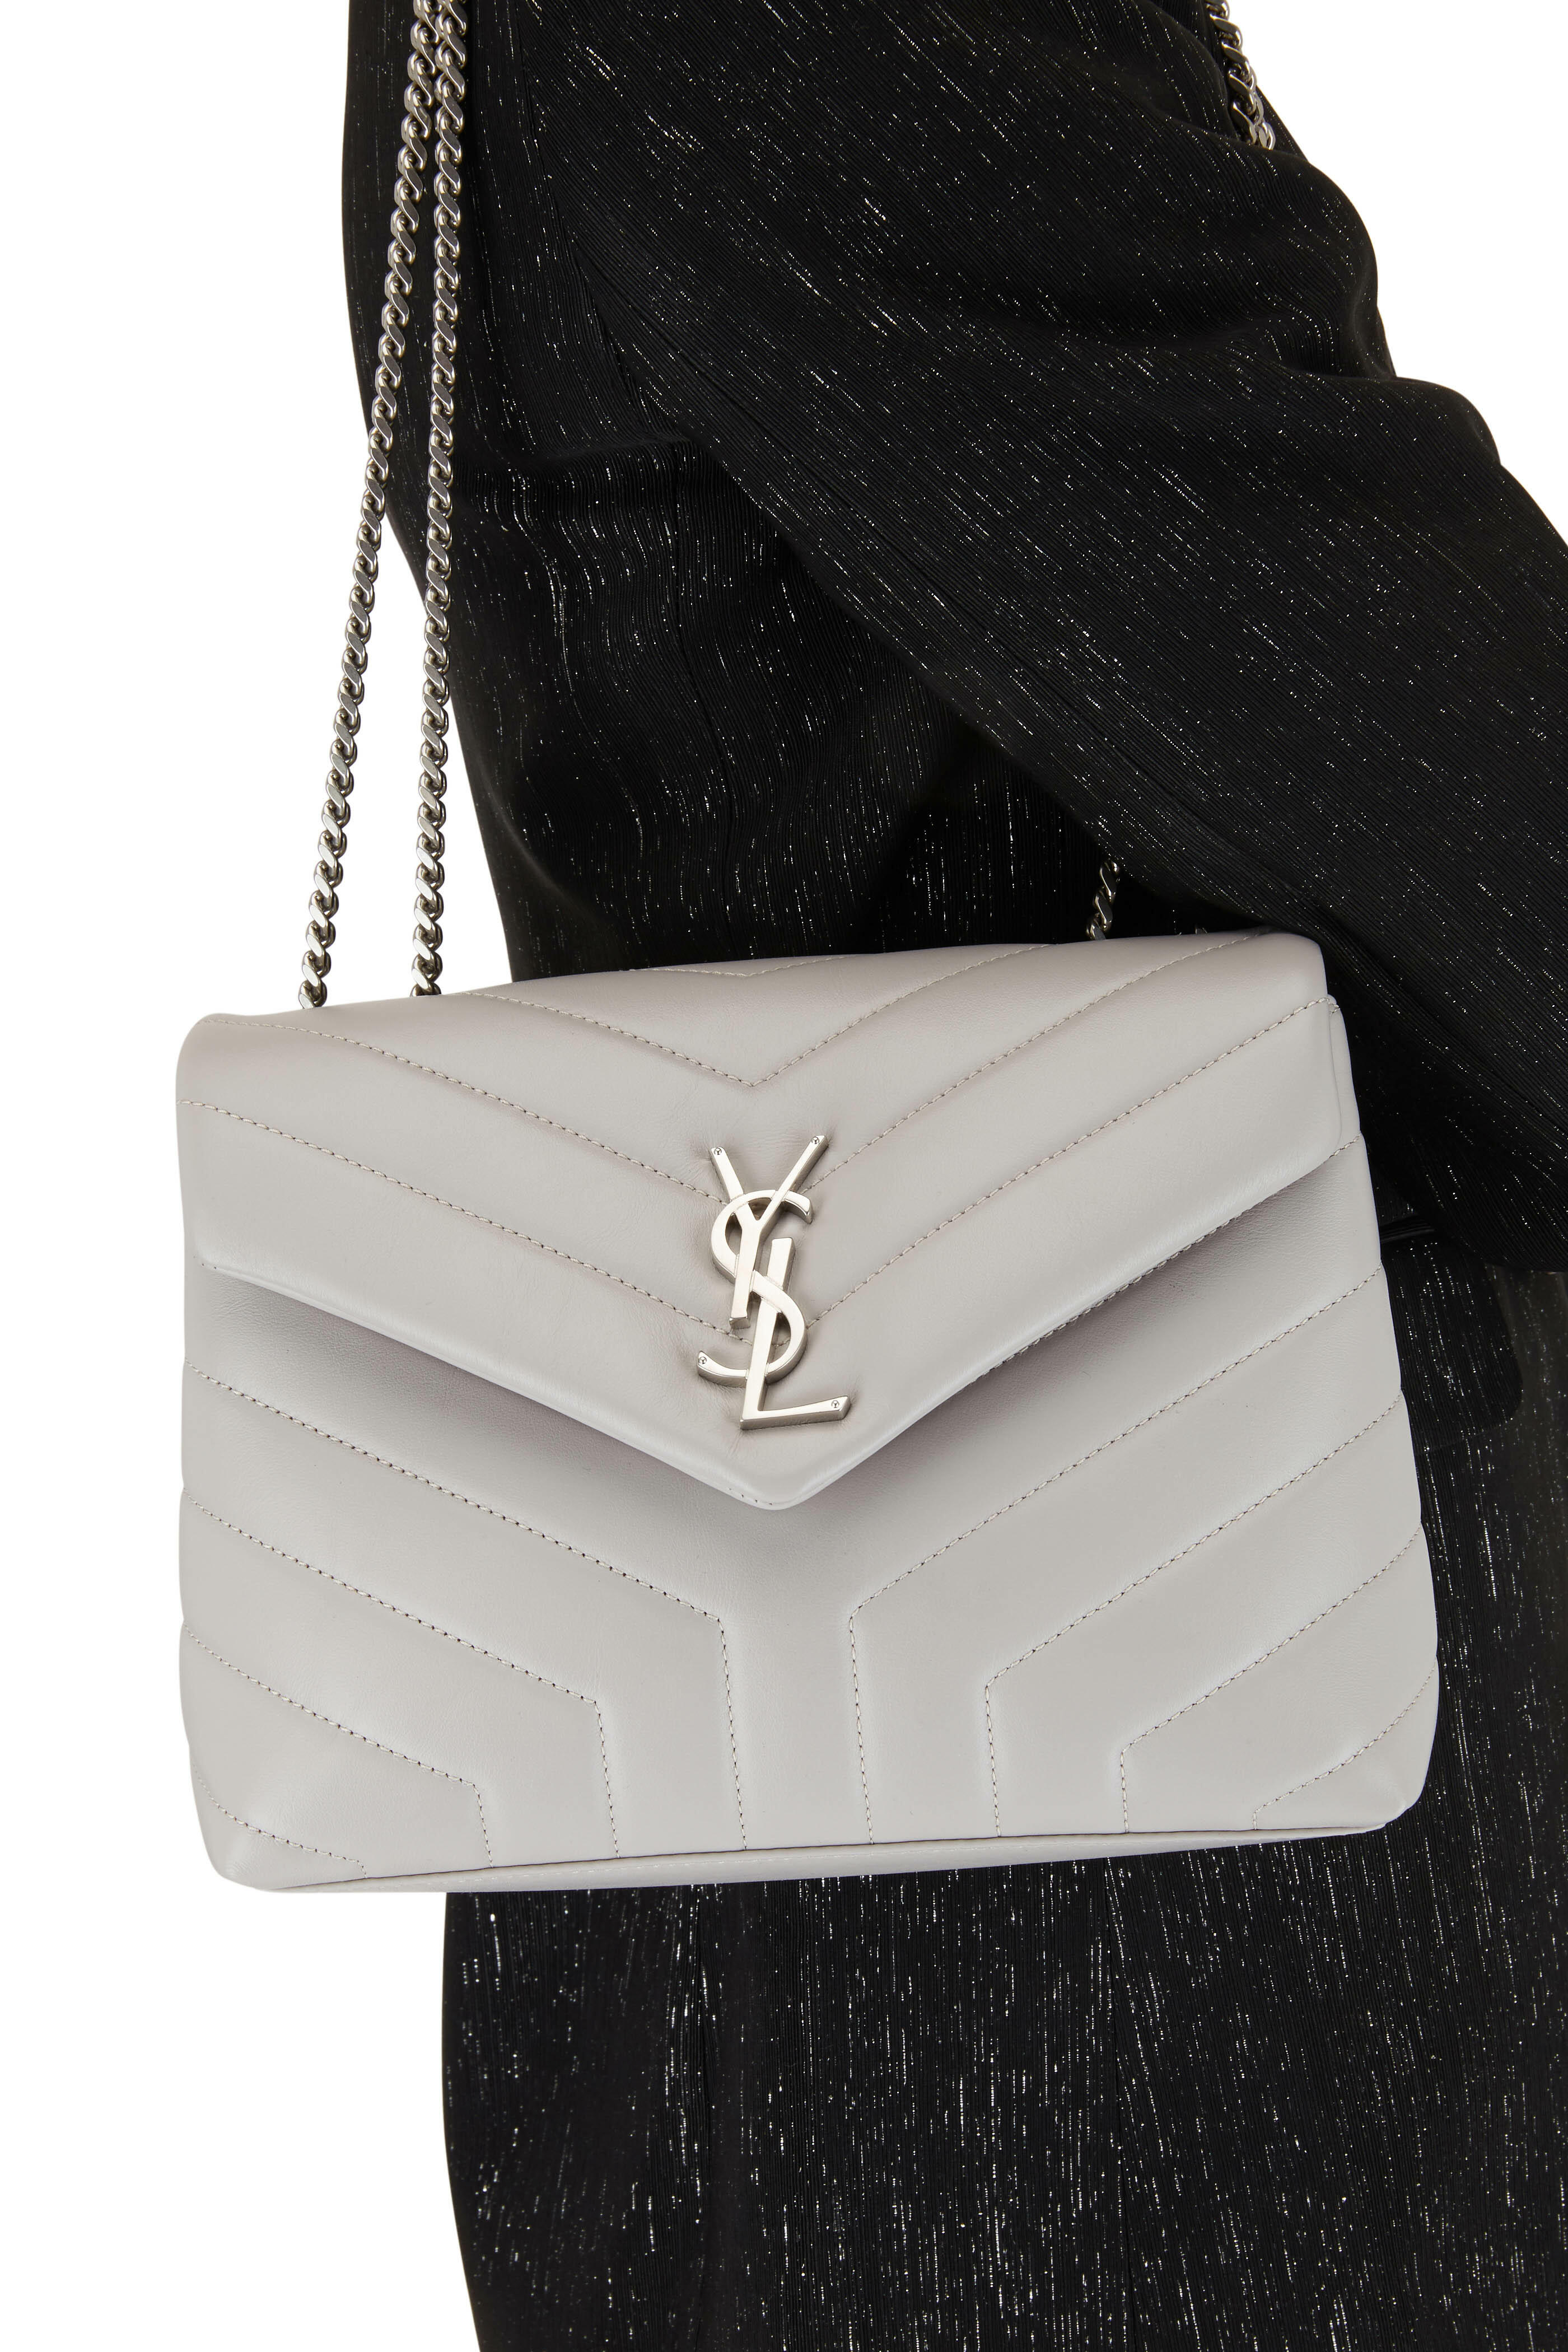 Saint Laurent Small Loulou Shoulder Bag In Quilted Leather in